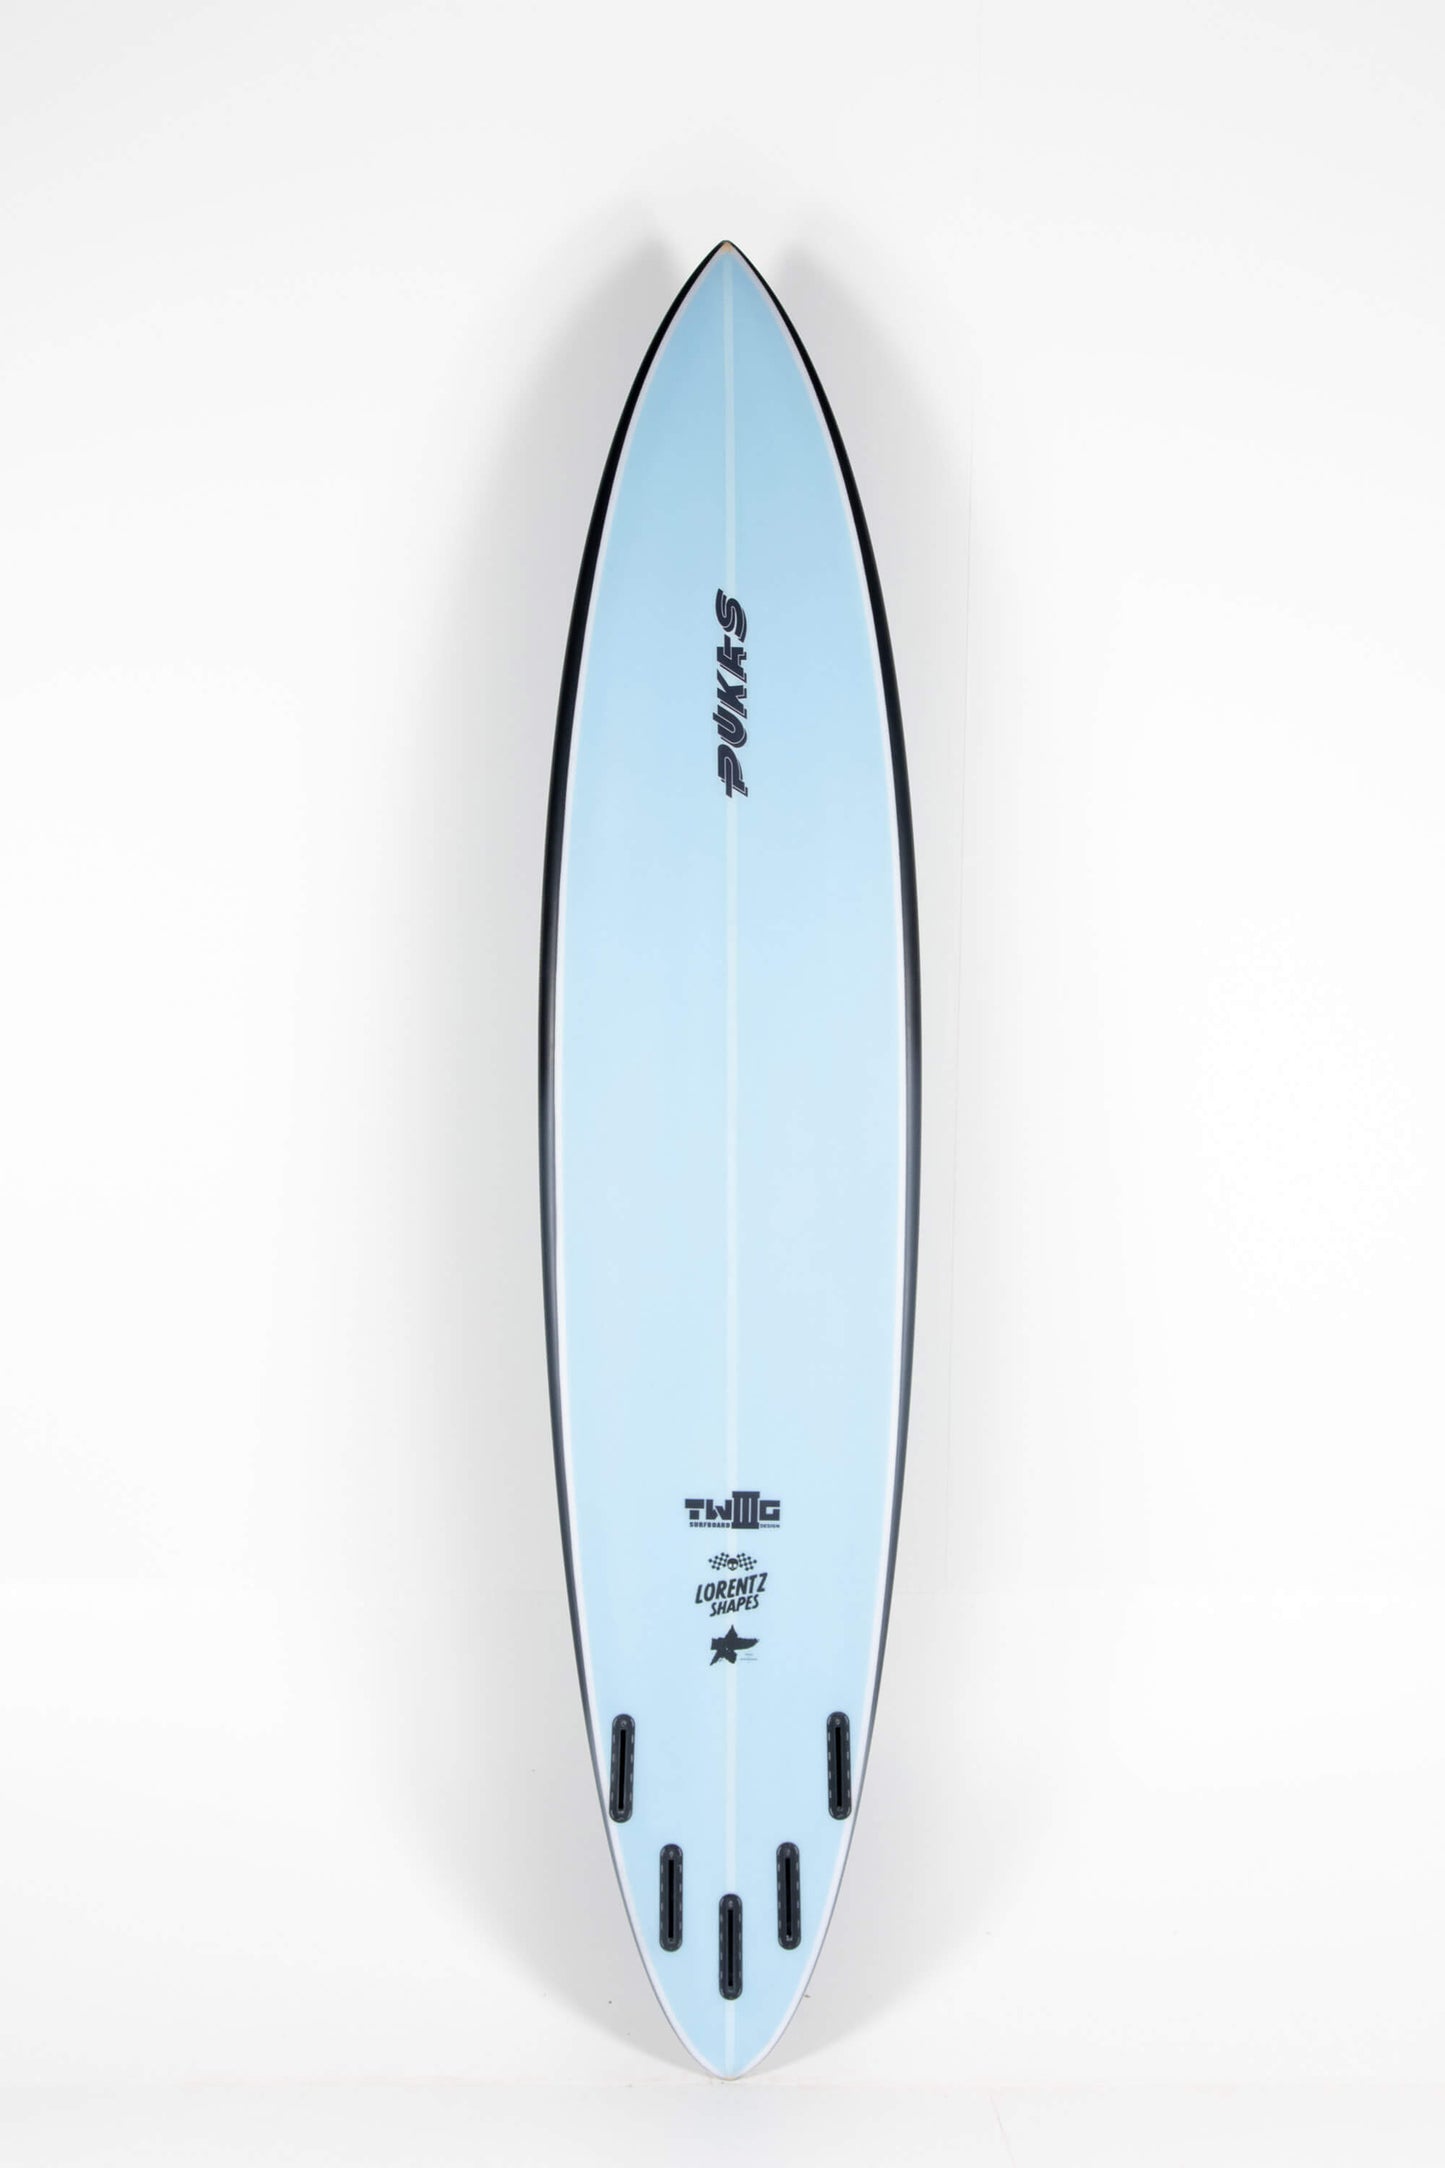 Pukas Surf Shop - Pukas Surfboard - TWIG CHARGER by Axel Lorentz - 8´6” x 20 5/8 x 3 3/8 - 60L  AX04825